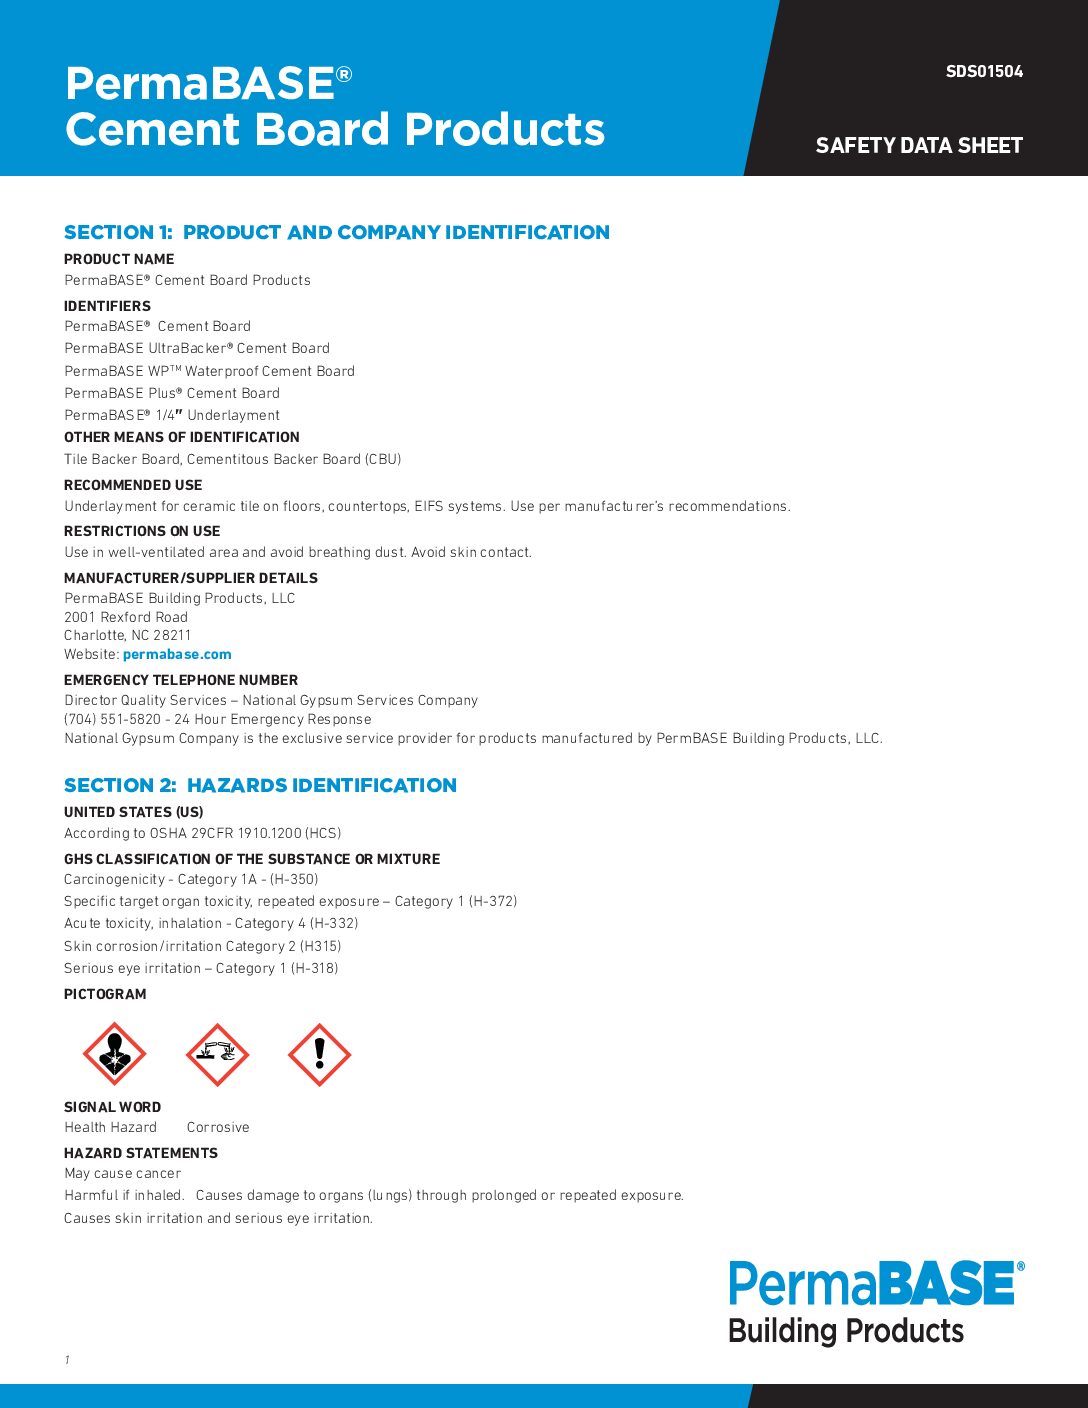 PermaBASE Cement Board Products Safety Data Sheet - Document Screen Grab